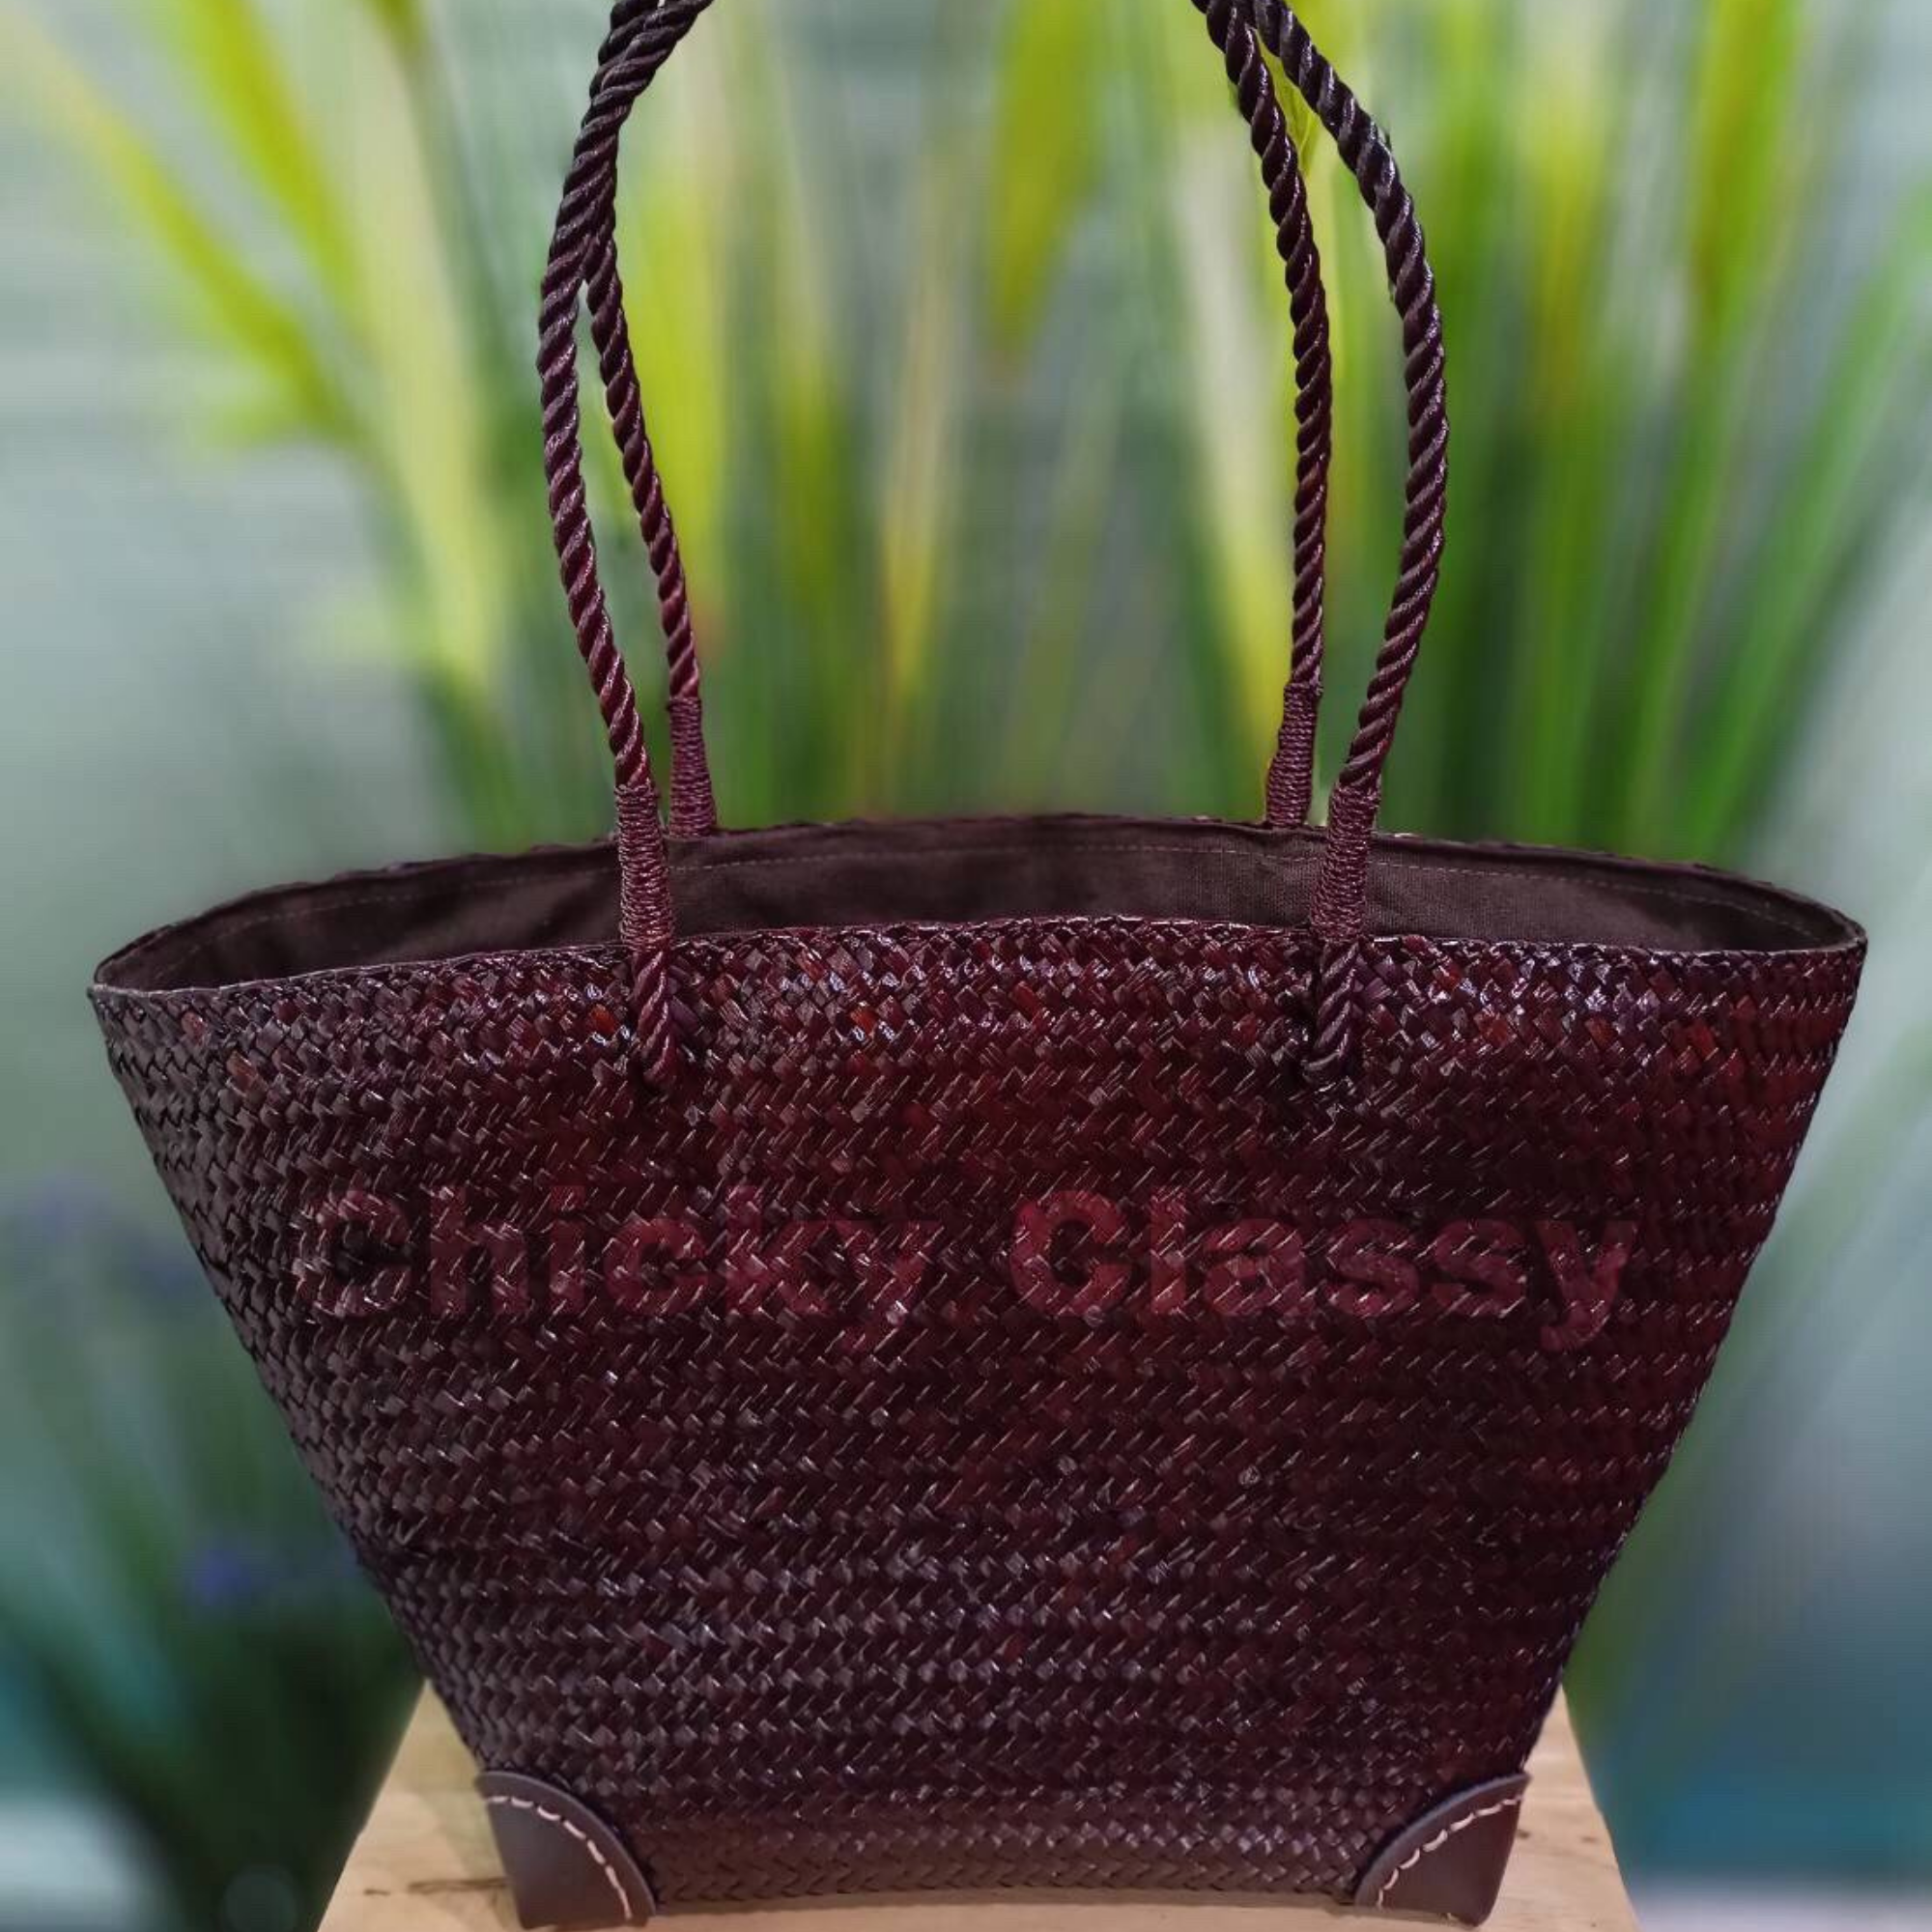 Chicky Classy Home made special date Bag